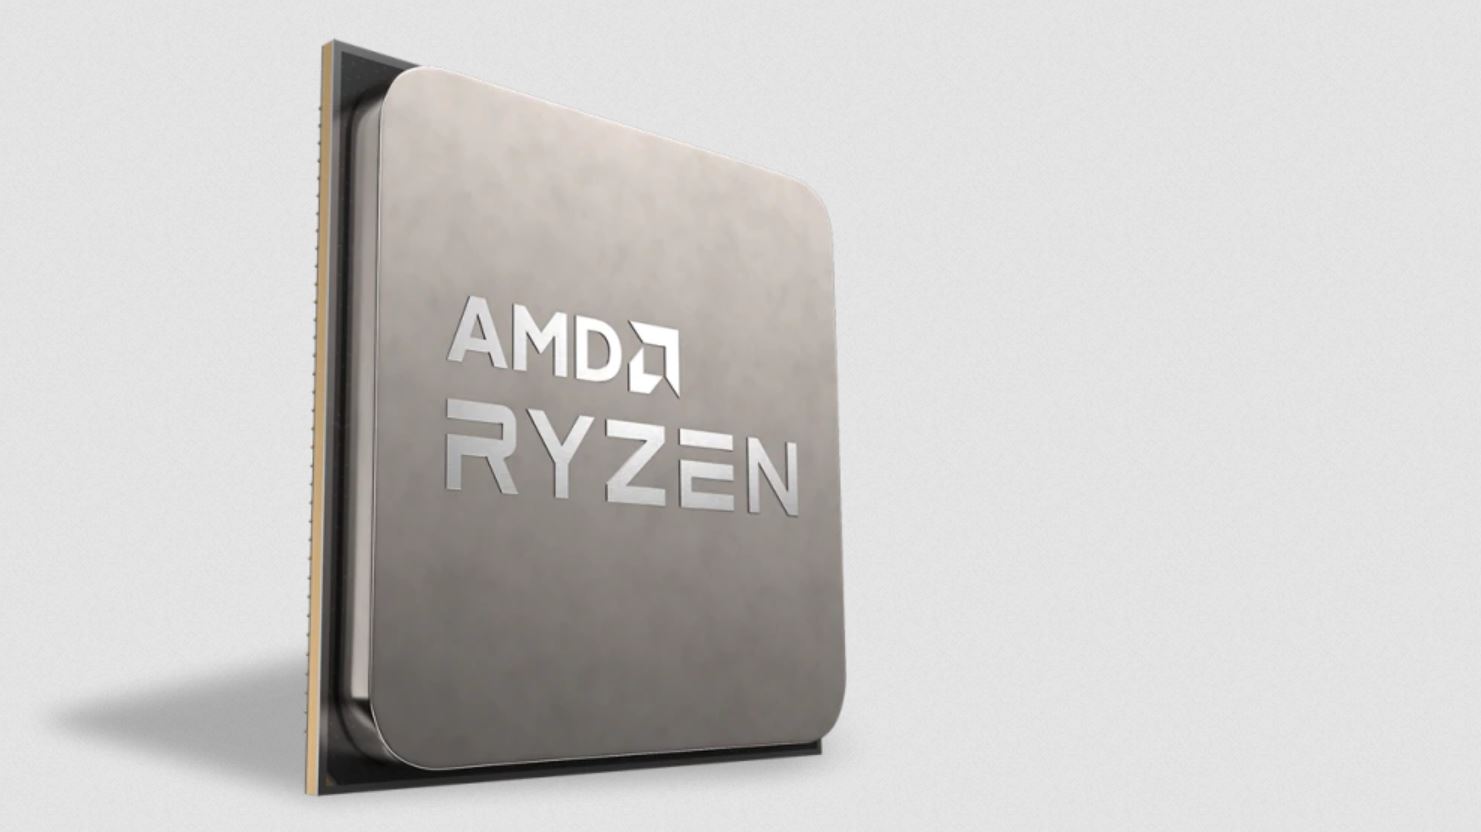 Media asset in full size related to 3dfxzone.it news item entitled as follows: AMD lancia le CPU Ryzen 9 5950X, 5900X, Ryzen 7 5800X e Ryzen 5 5600X | Image Name: news31191_AMD-Ryzen-5000_2.jpg